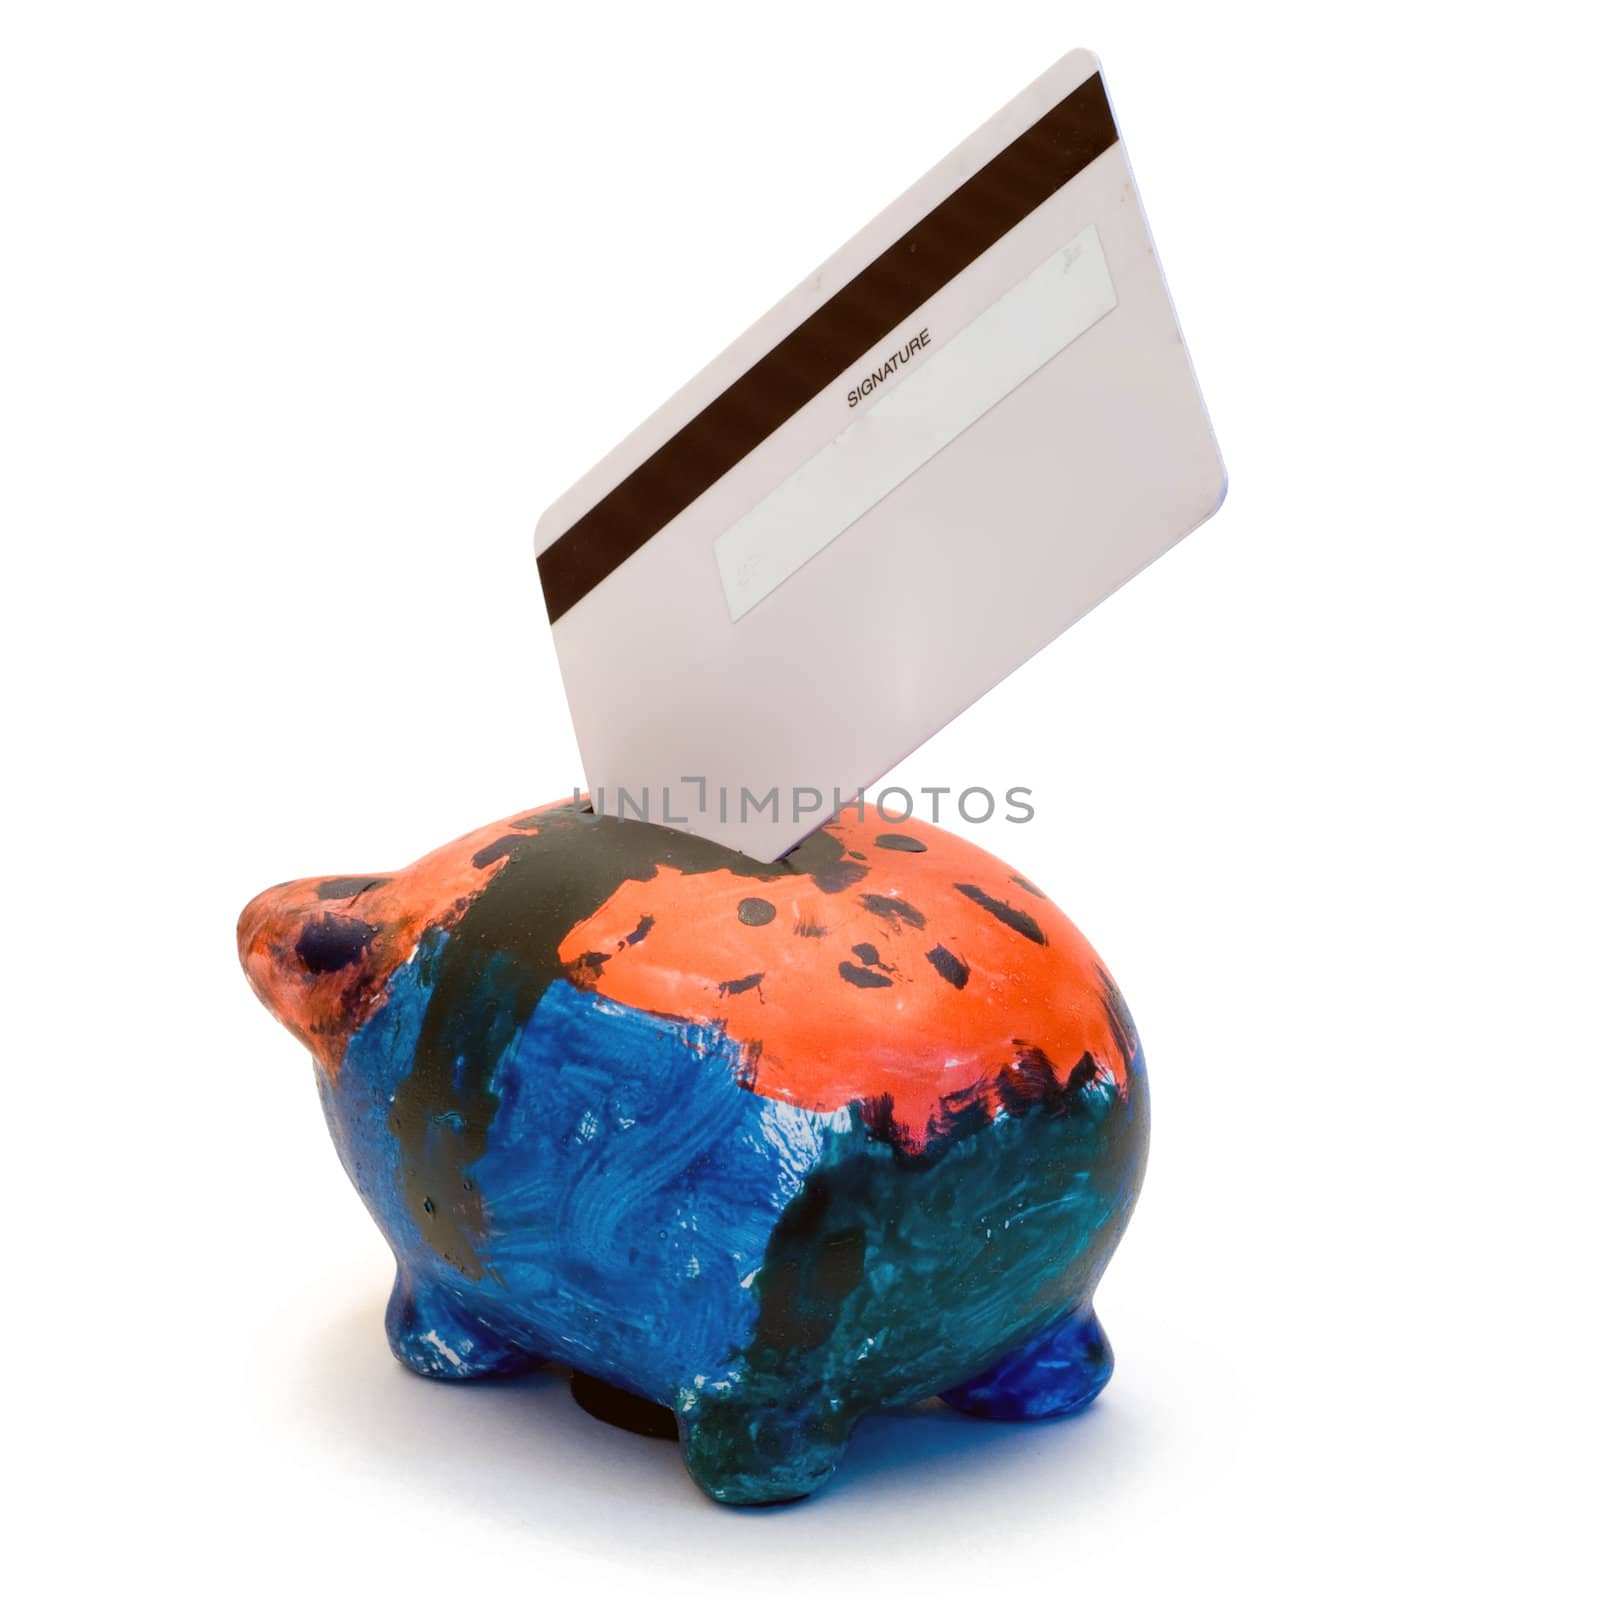 A bank card placed in a painted piggy bank, isolated on a white background